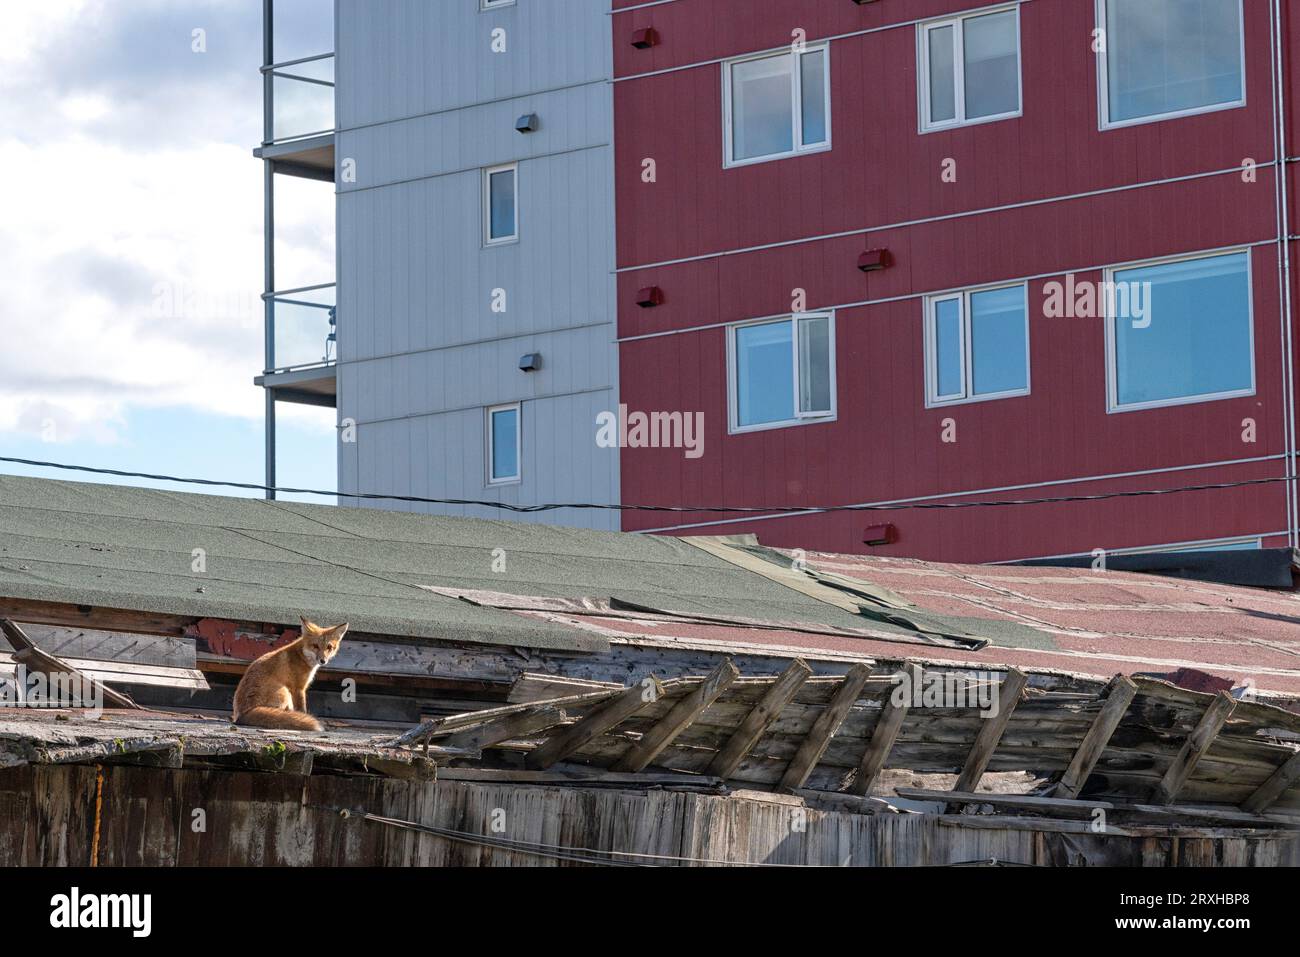 Urban fox (Vulpes) sitting on a rooftop in downtown Whitehorse, eyeing the camera; Whitehorse, Yukon, Canada Stock Photo